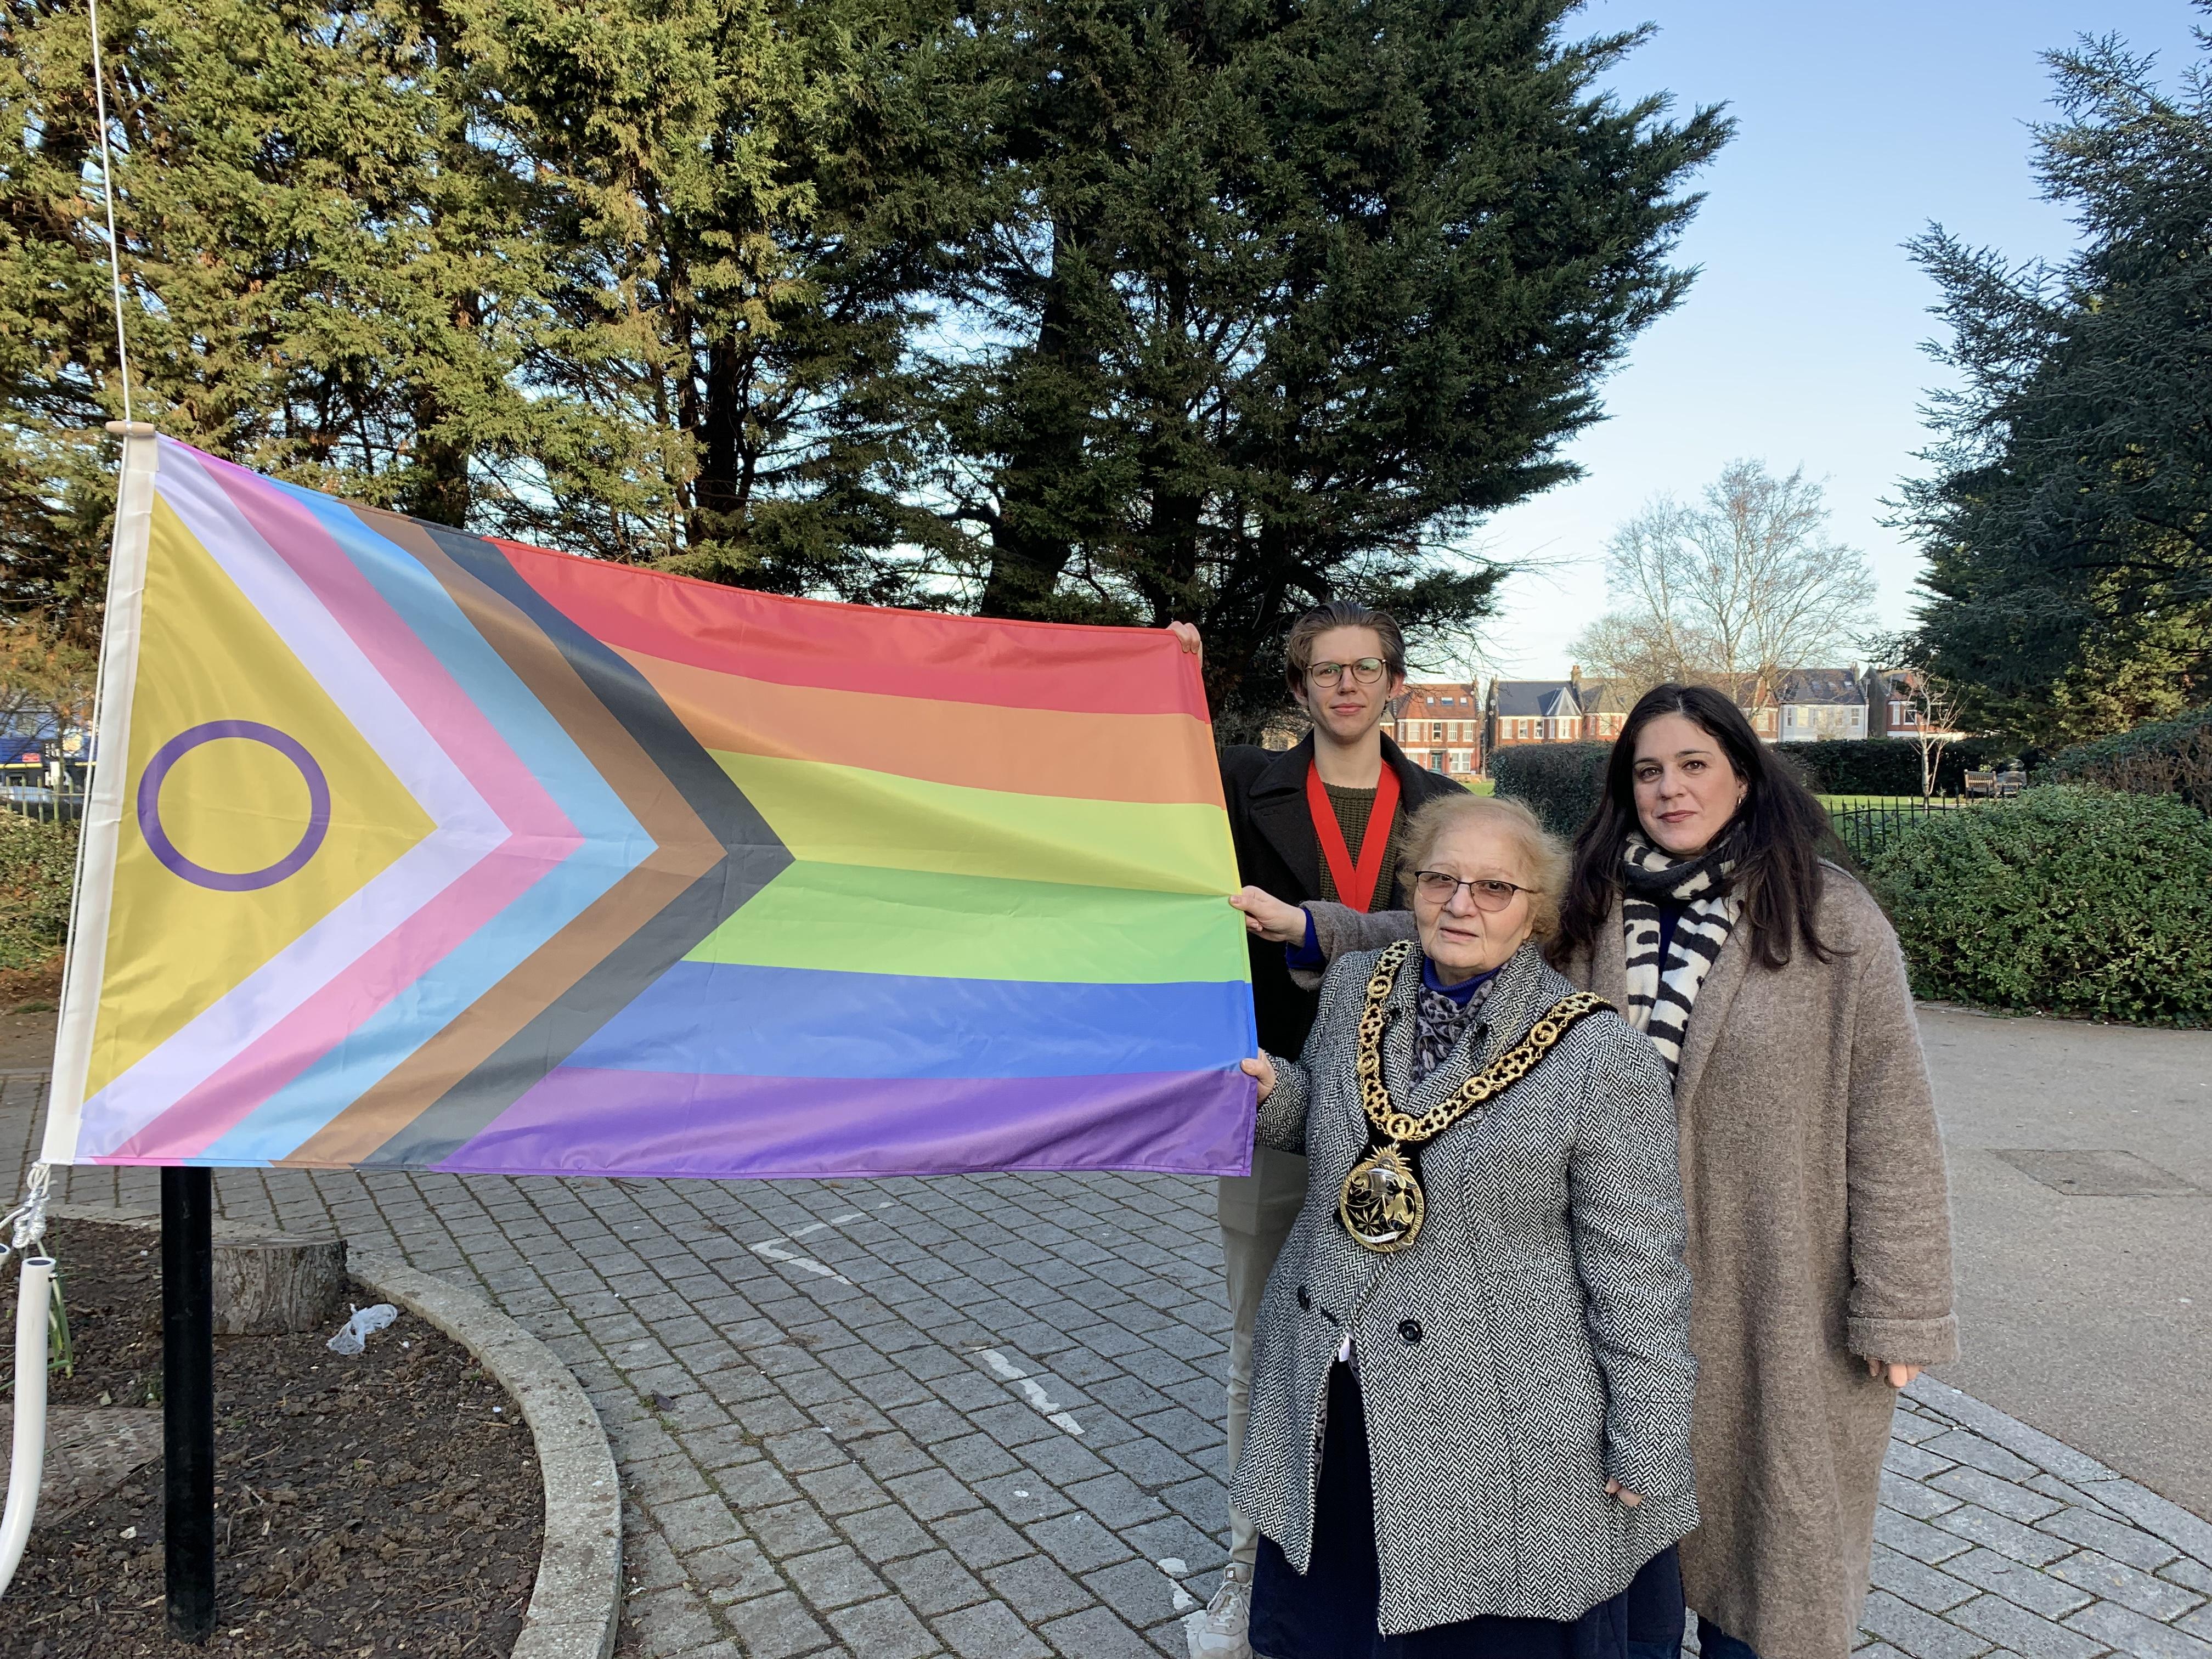 Cllr Peray Ahmet, Cllr Lester Buxton and Cllr Gina Adamou with the Progress Flag